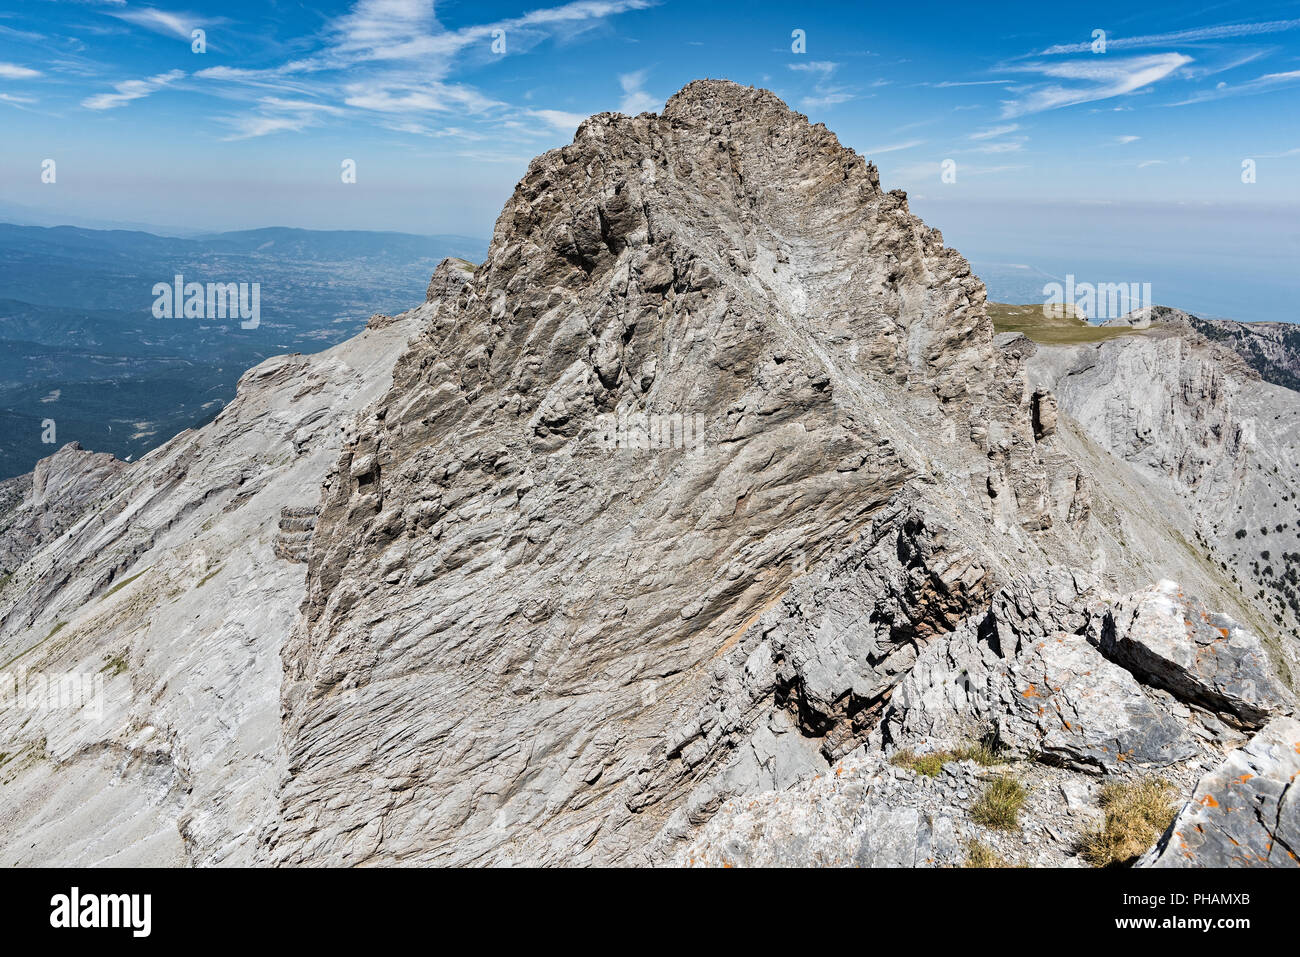 View of Mytikas ,the highest peak of Mount Olympus in Greece, home of the ancient Greek gods Stock Photo